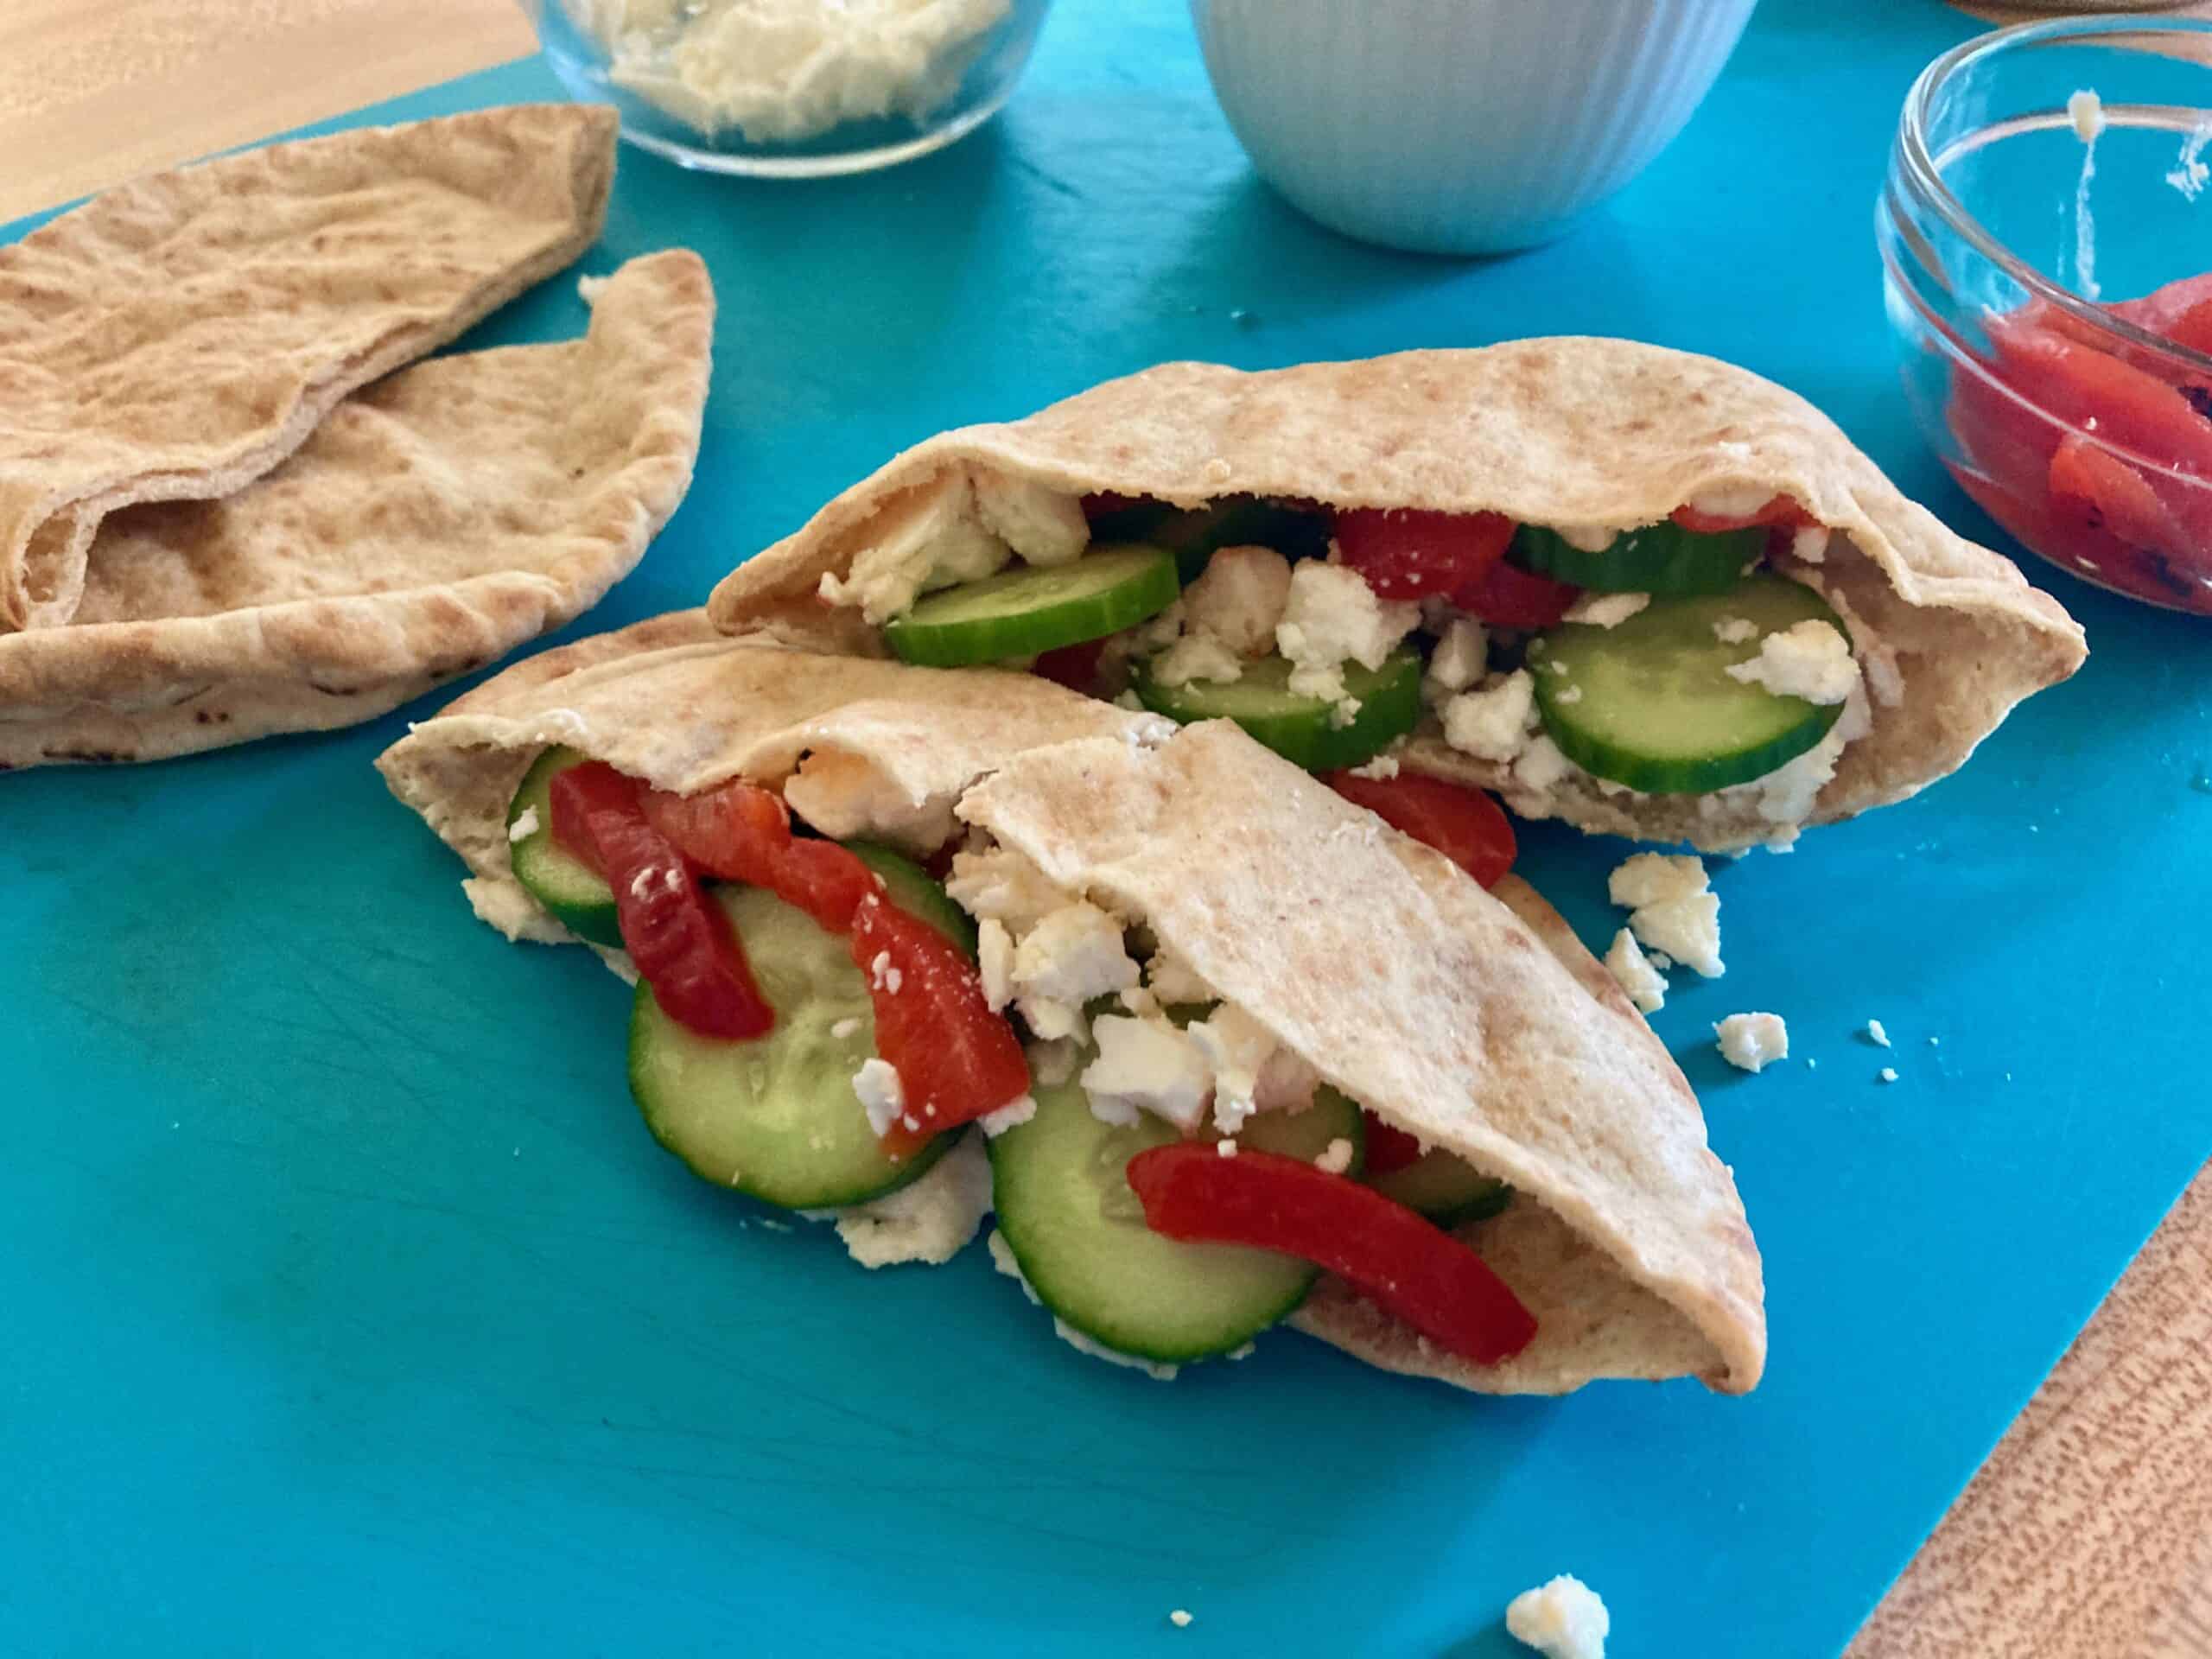 Two veggie hummus stuffed pitas on teal cutting board with small bowls of hummus and feta cheese in the background.